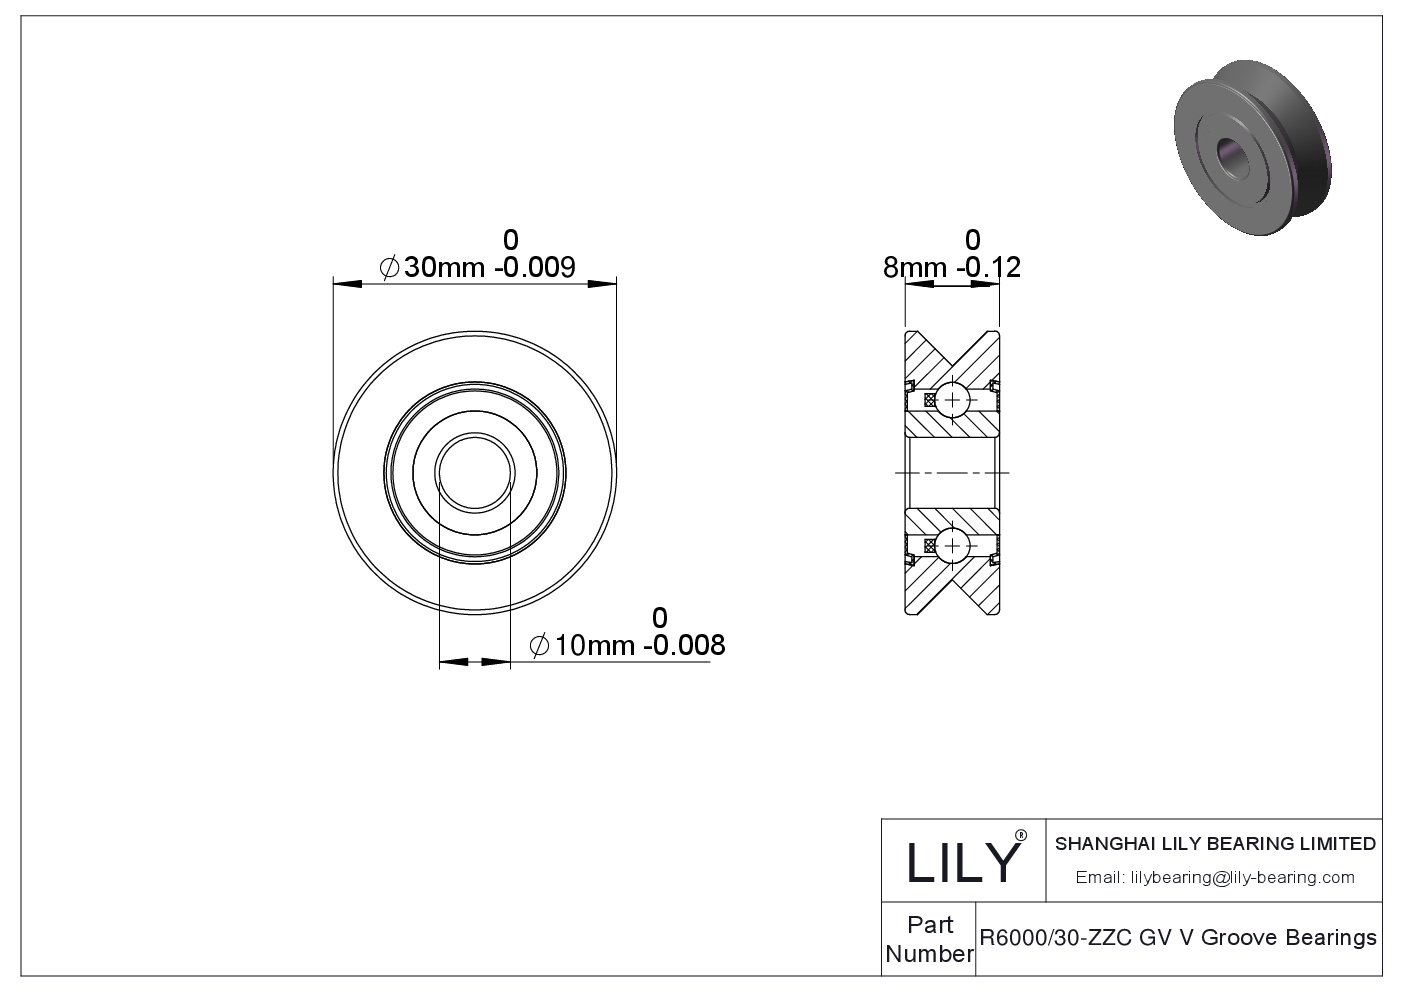 R6000/30-ZZC GV V Groove Bearings cad drawing